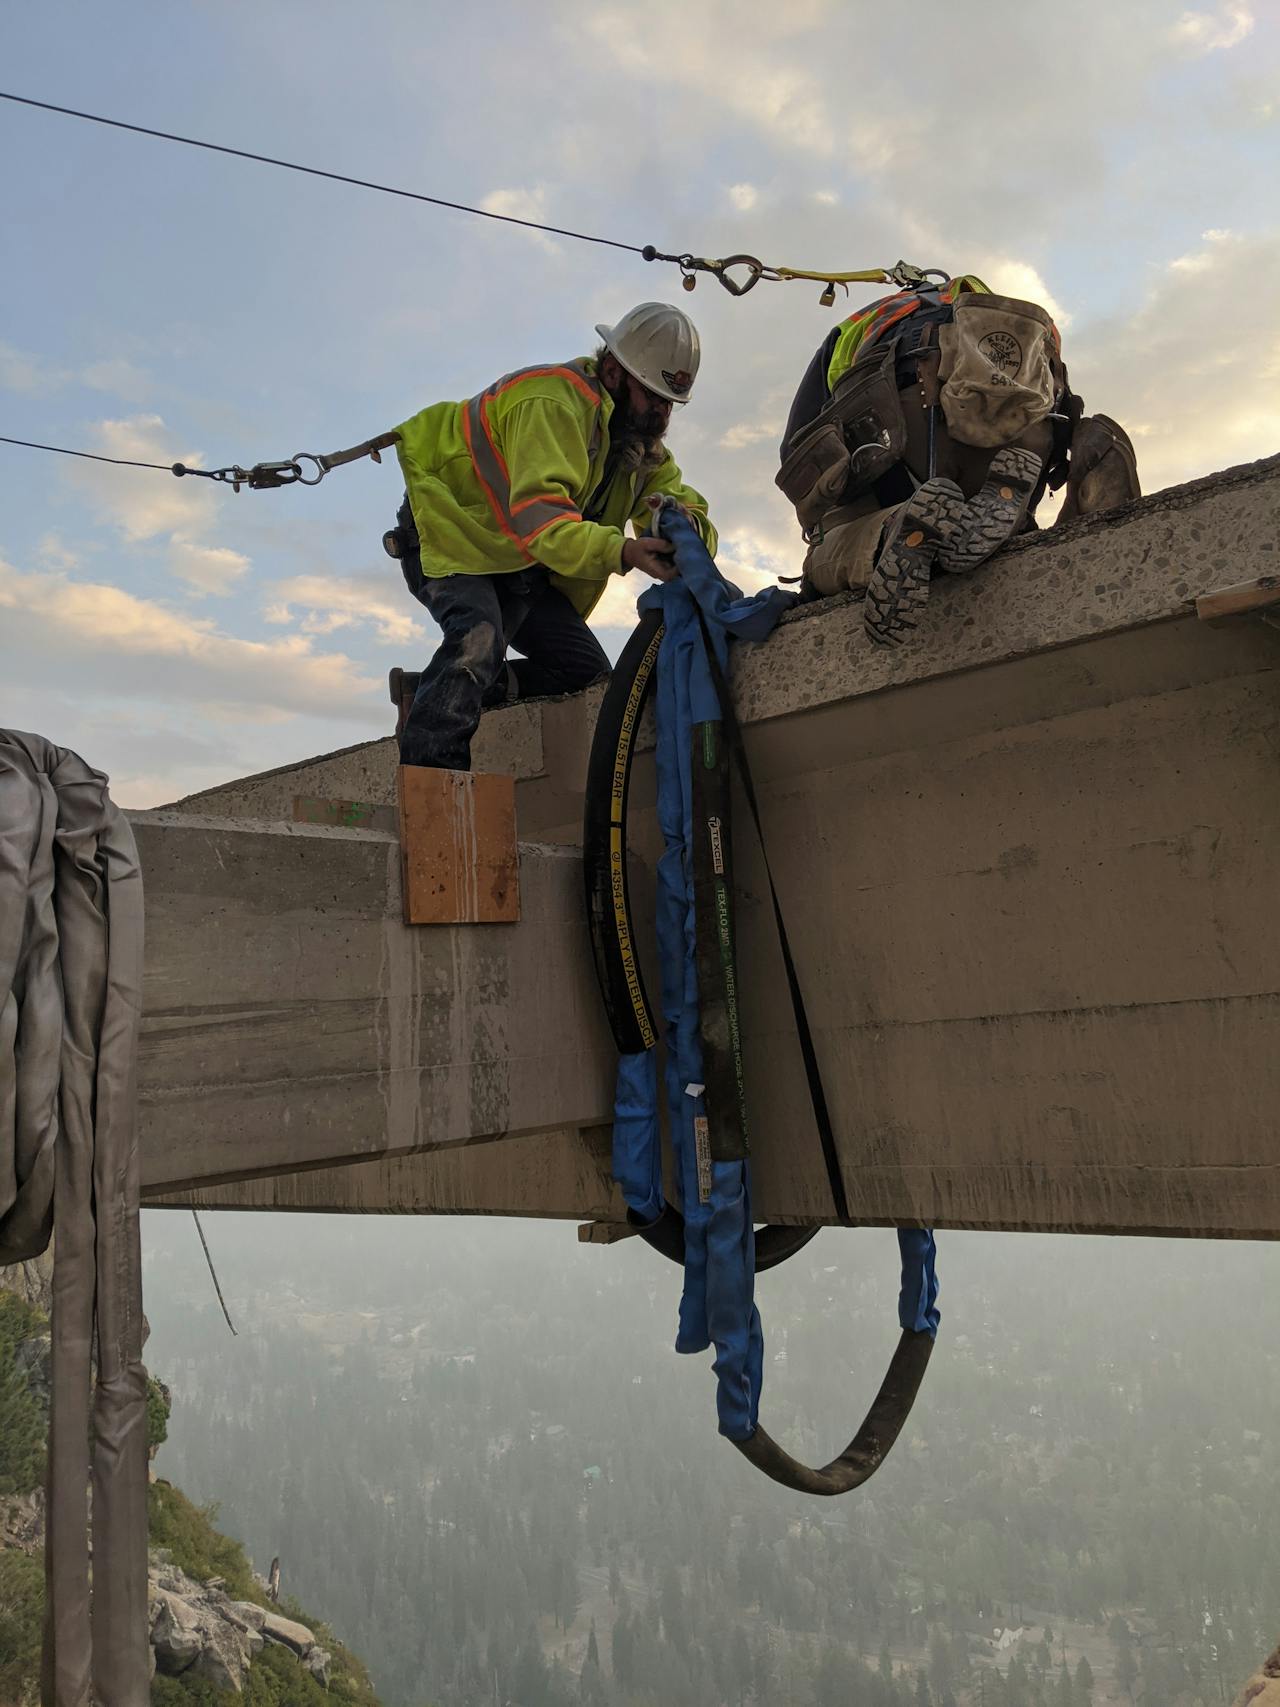 Replacement of the Highway 50 Caltrans viaduct